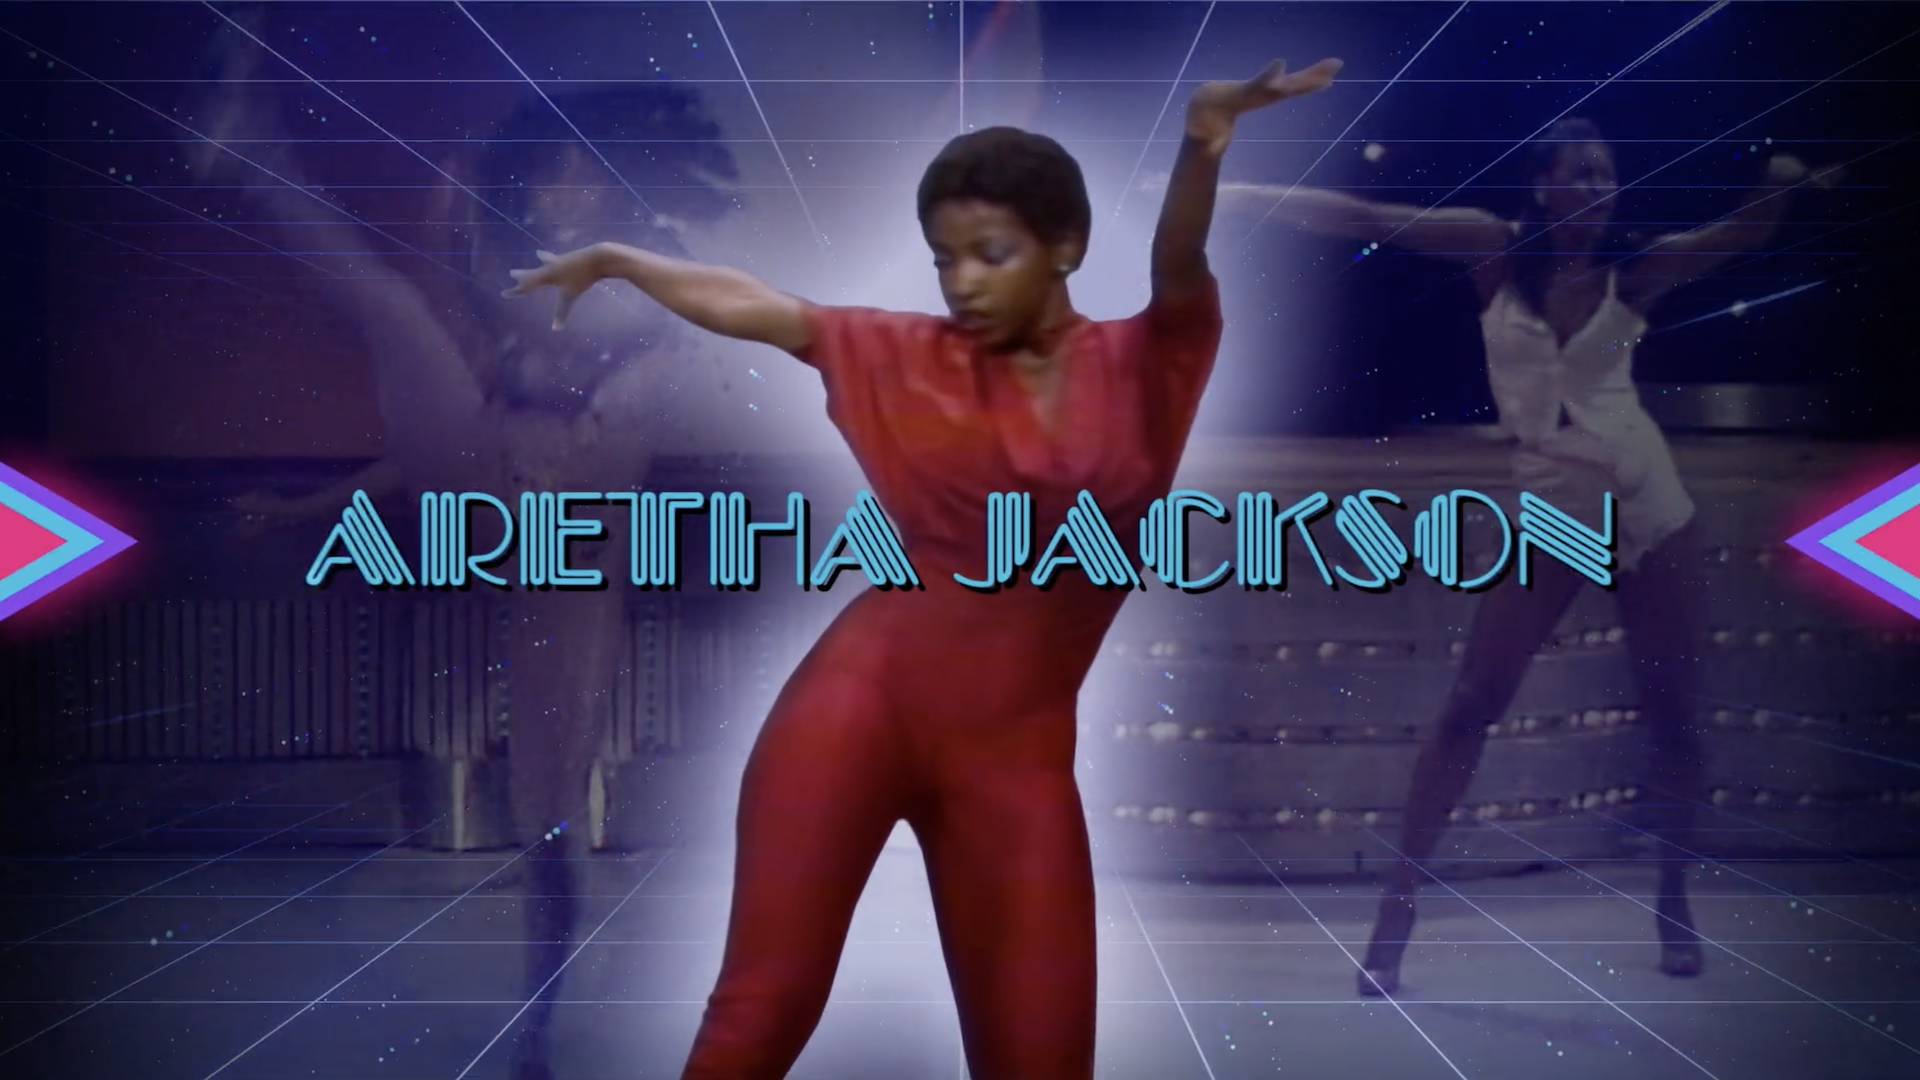 Soul Train dancer Aretha Franklin, dancing in a red outfit.